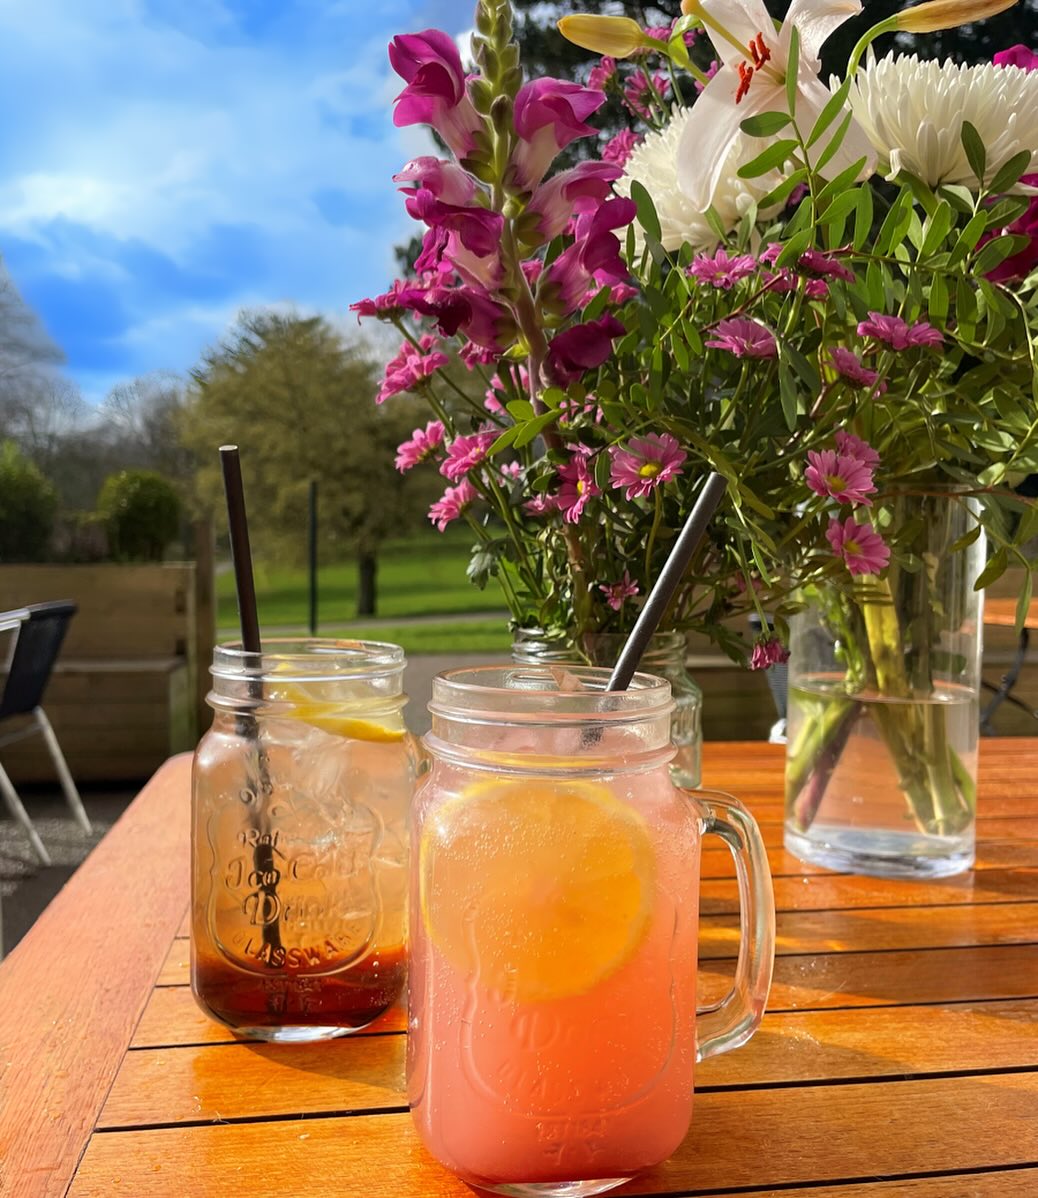 Dine Venues | The Garden Room | Cafe Roundhay Park Leeds